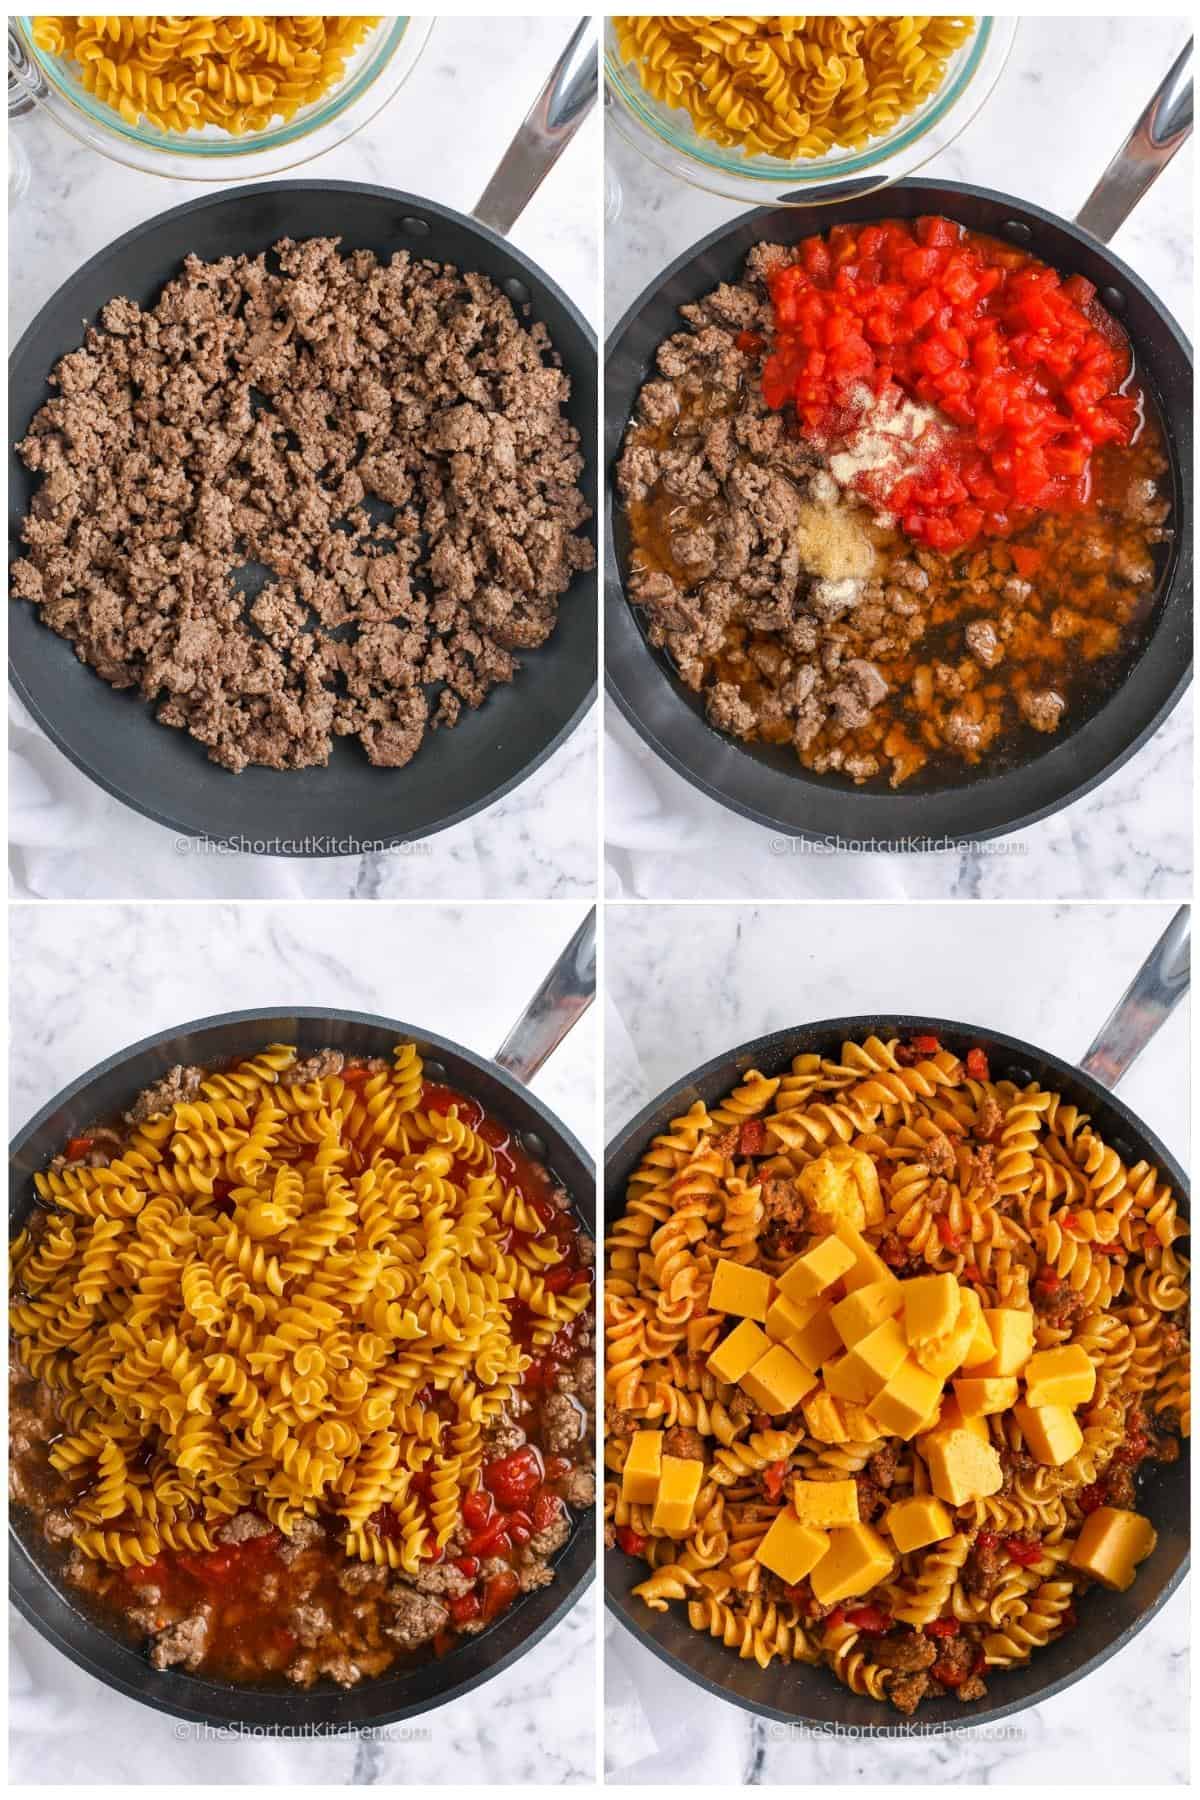 process of adding ingredients together to make Skillet Pasta With Ground Beef